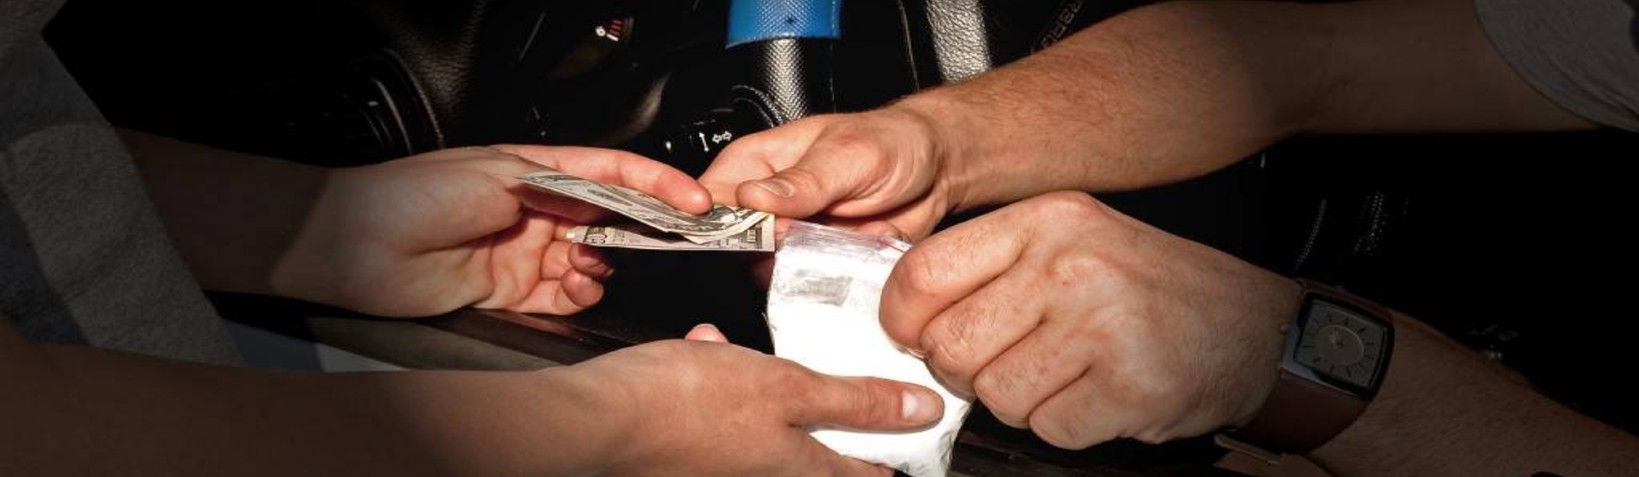 <b>California Vehicle Code Section 23152(c): </b><br>Driving While Addicted to Drugs